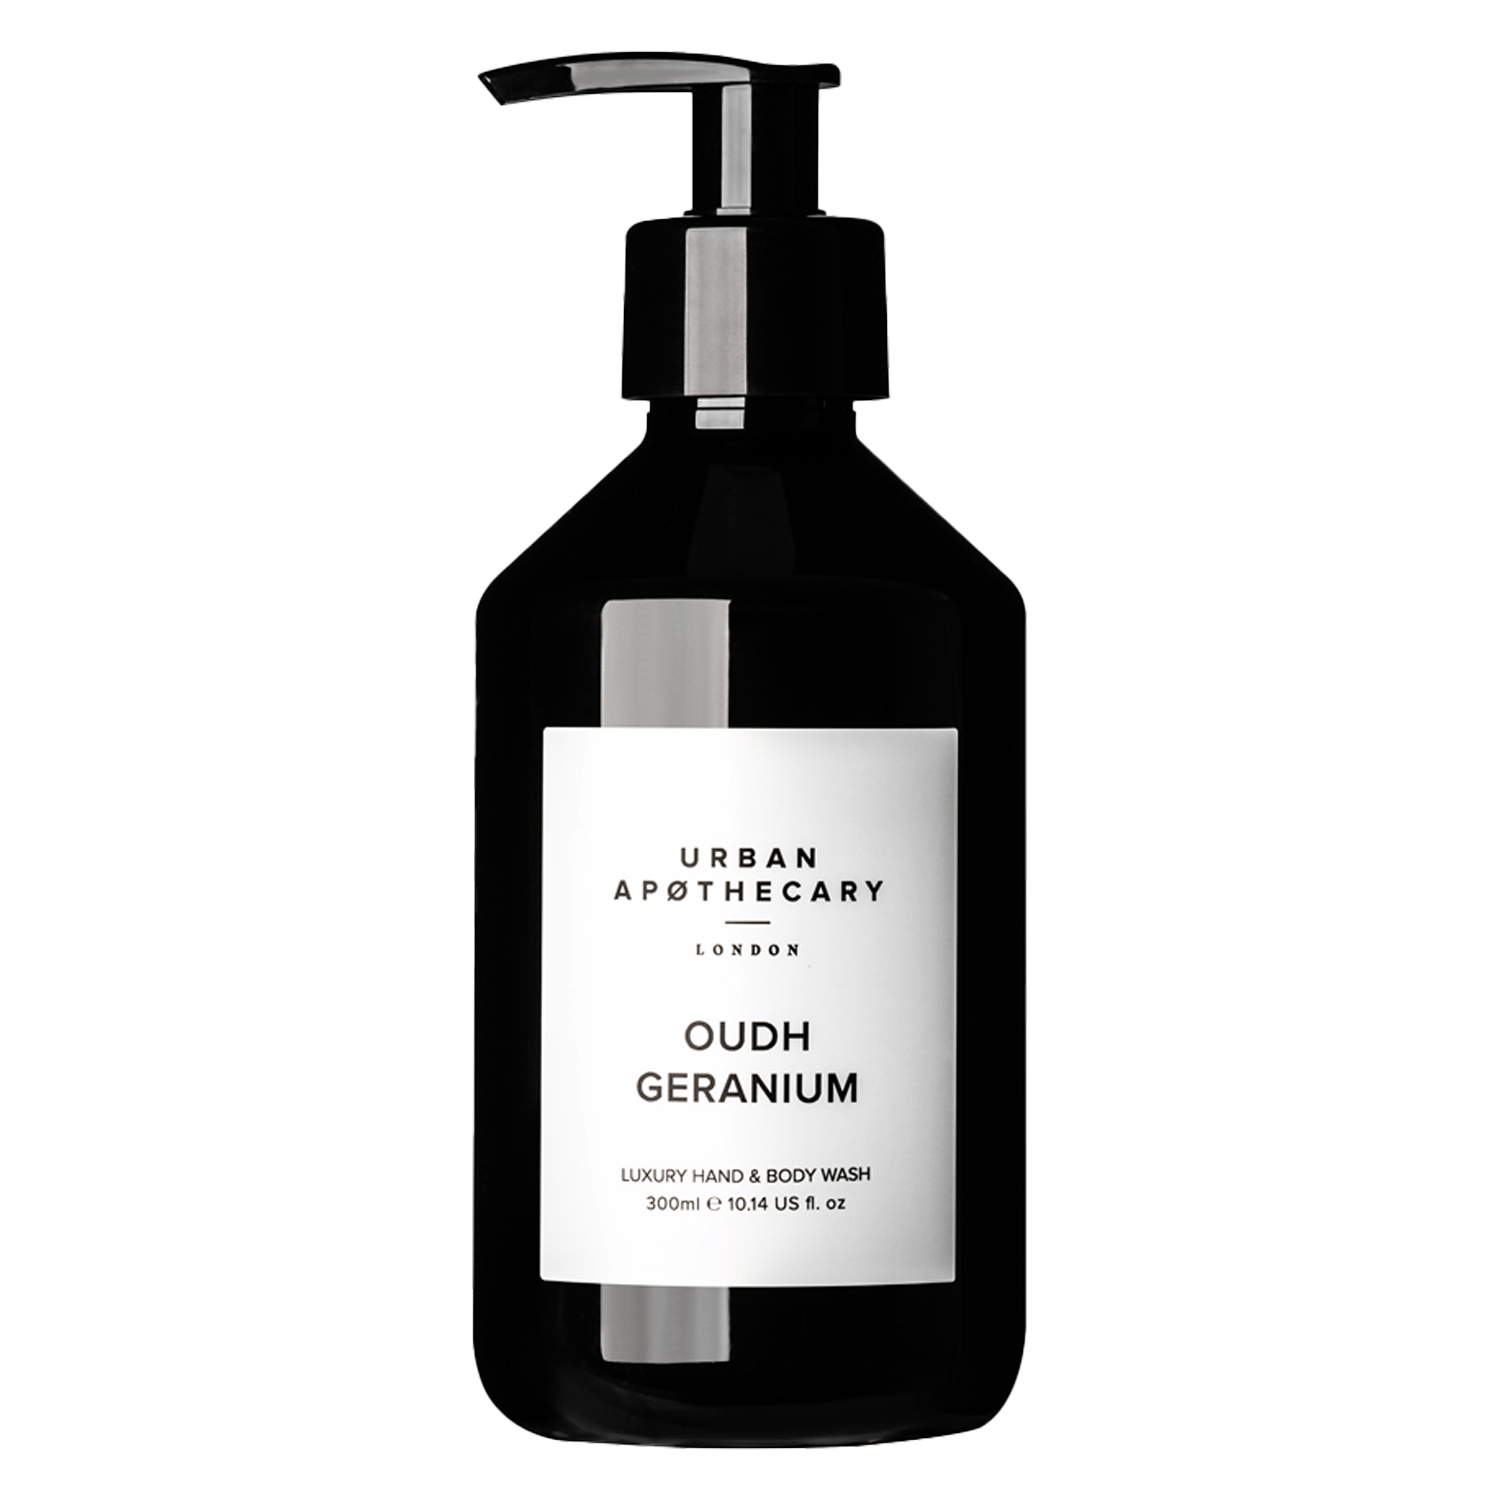 Product image from Urban Apothecary - Luxury Hand & Body Wash Oudh Geranium